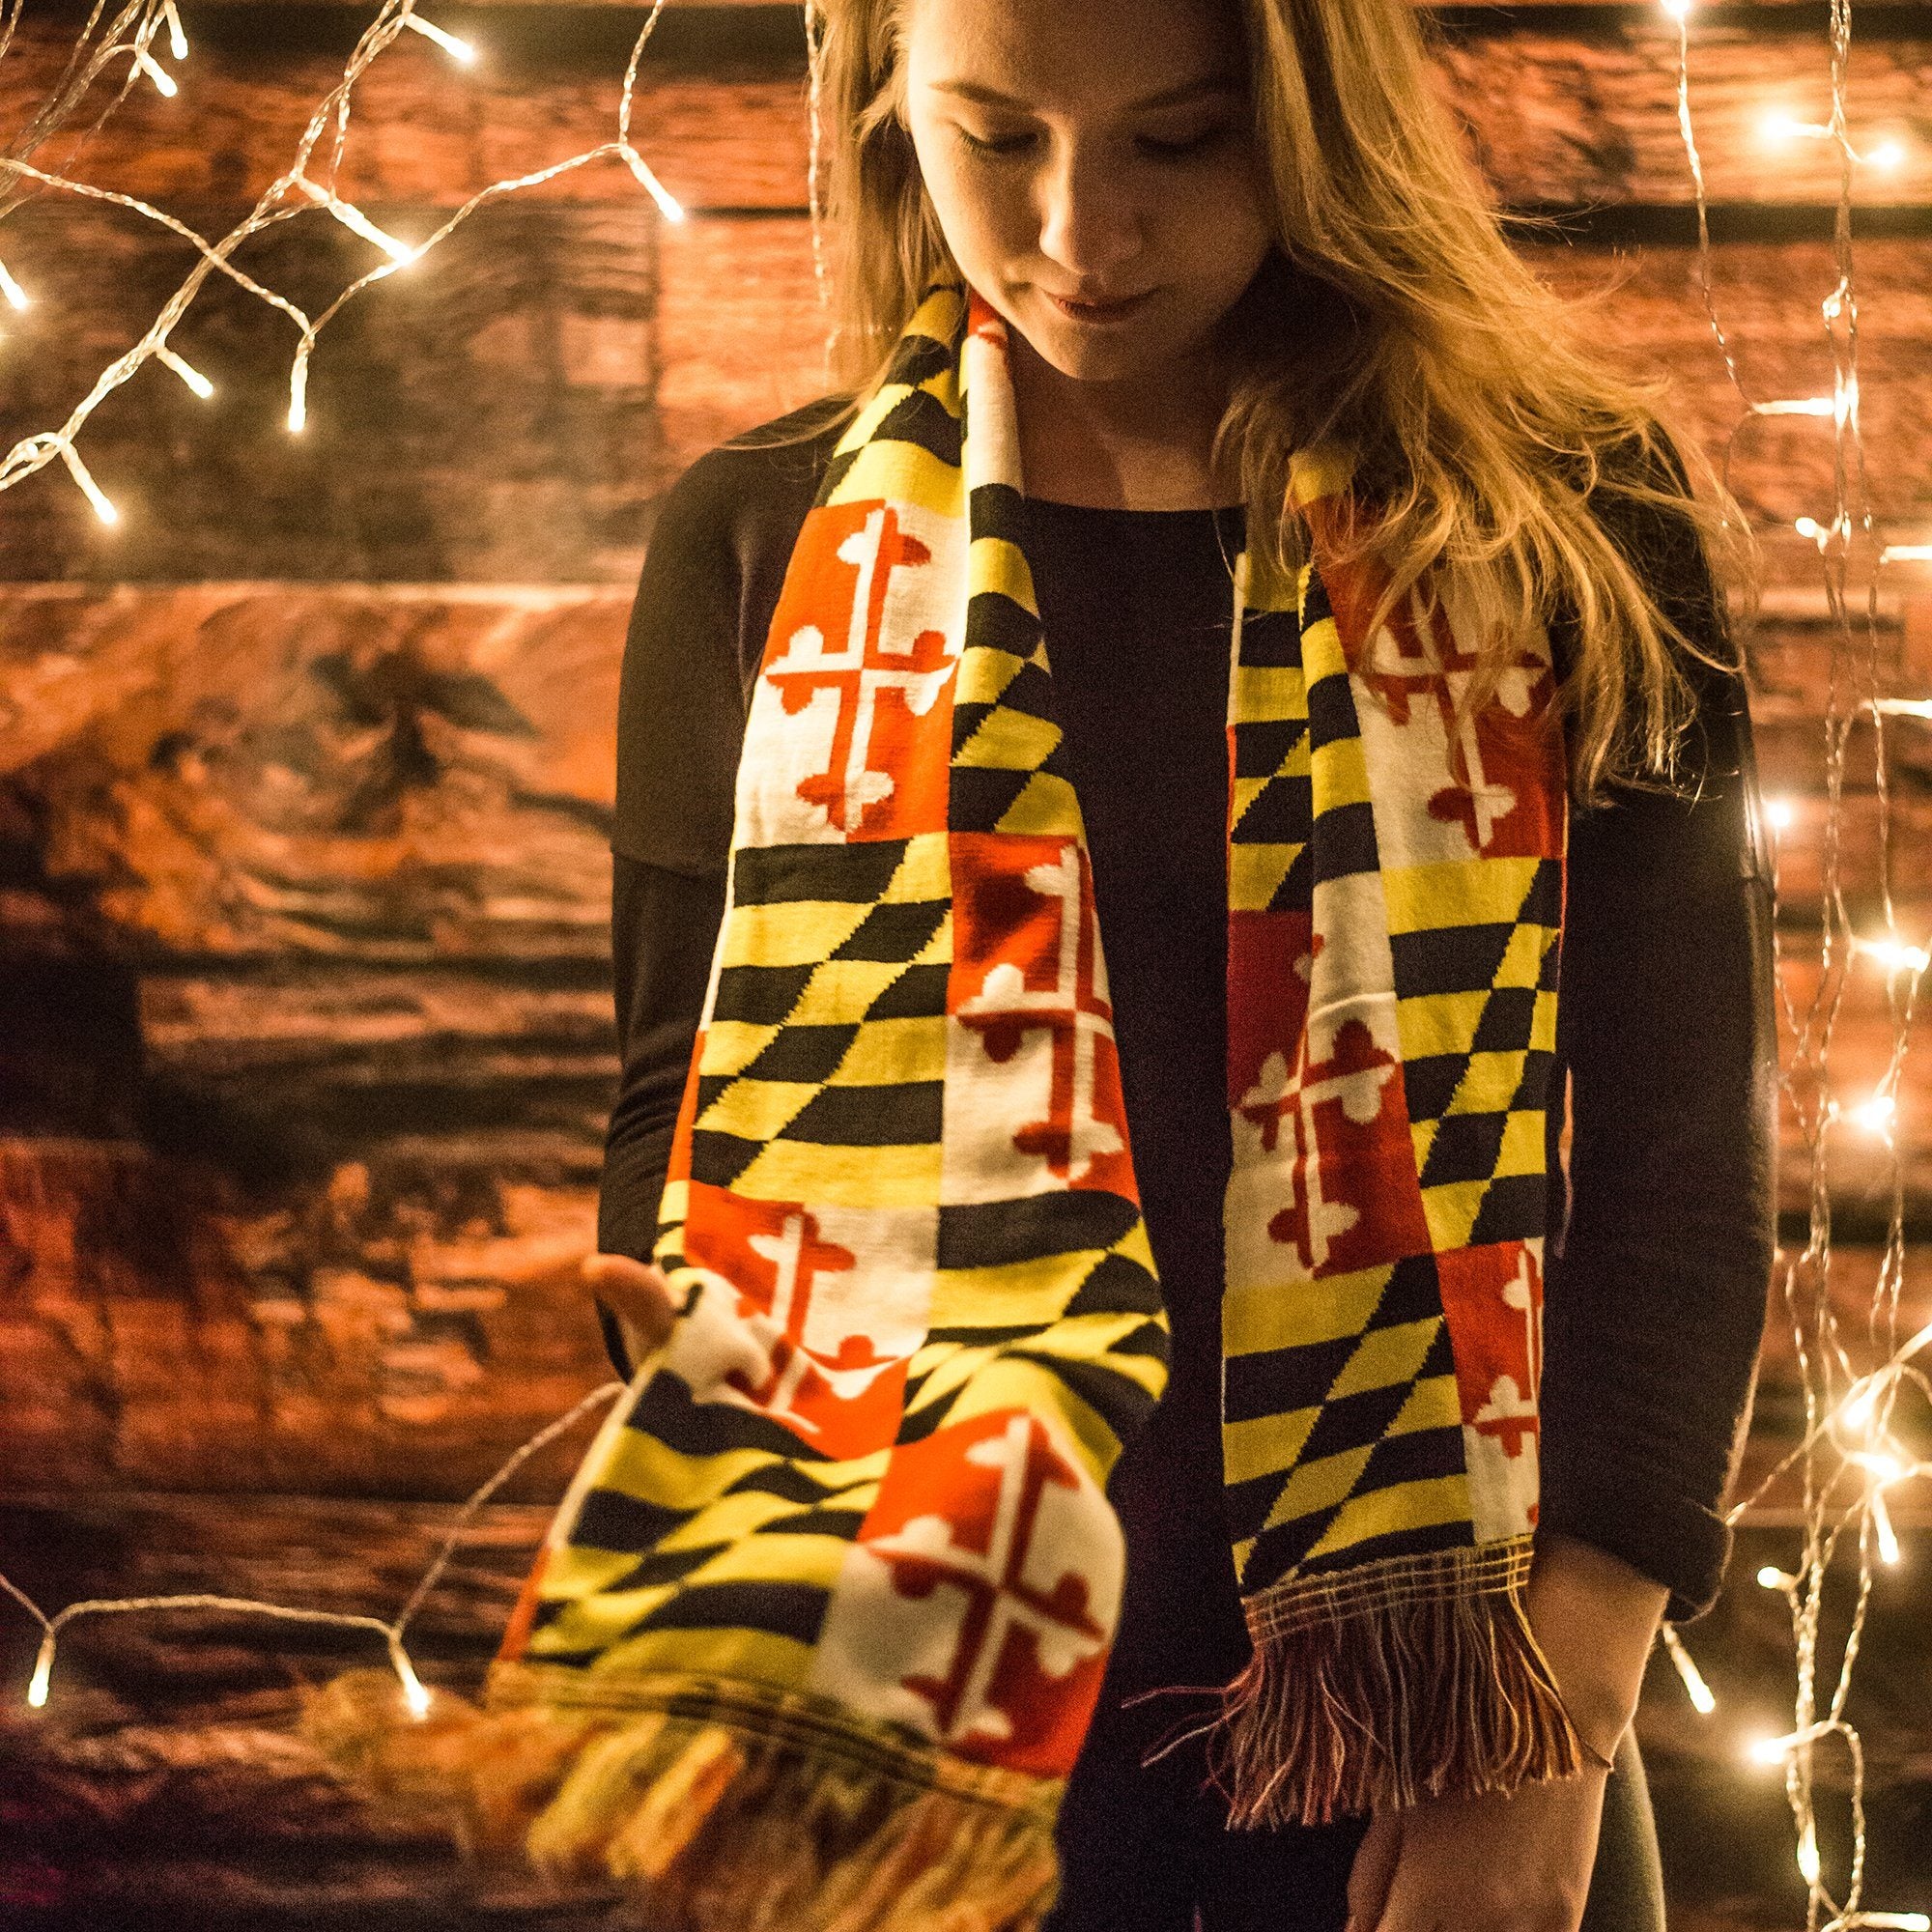 Maryland Flag / Winter Scarf - Route One Apparel